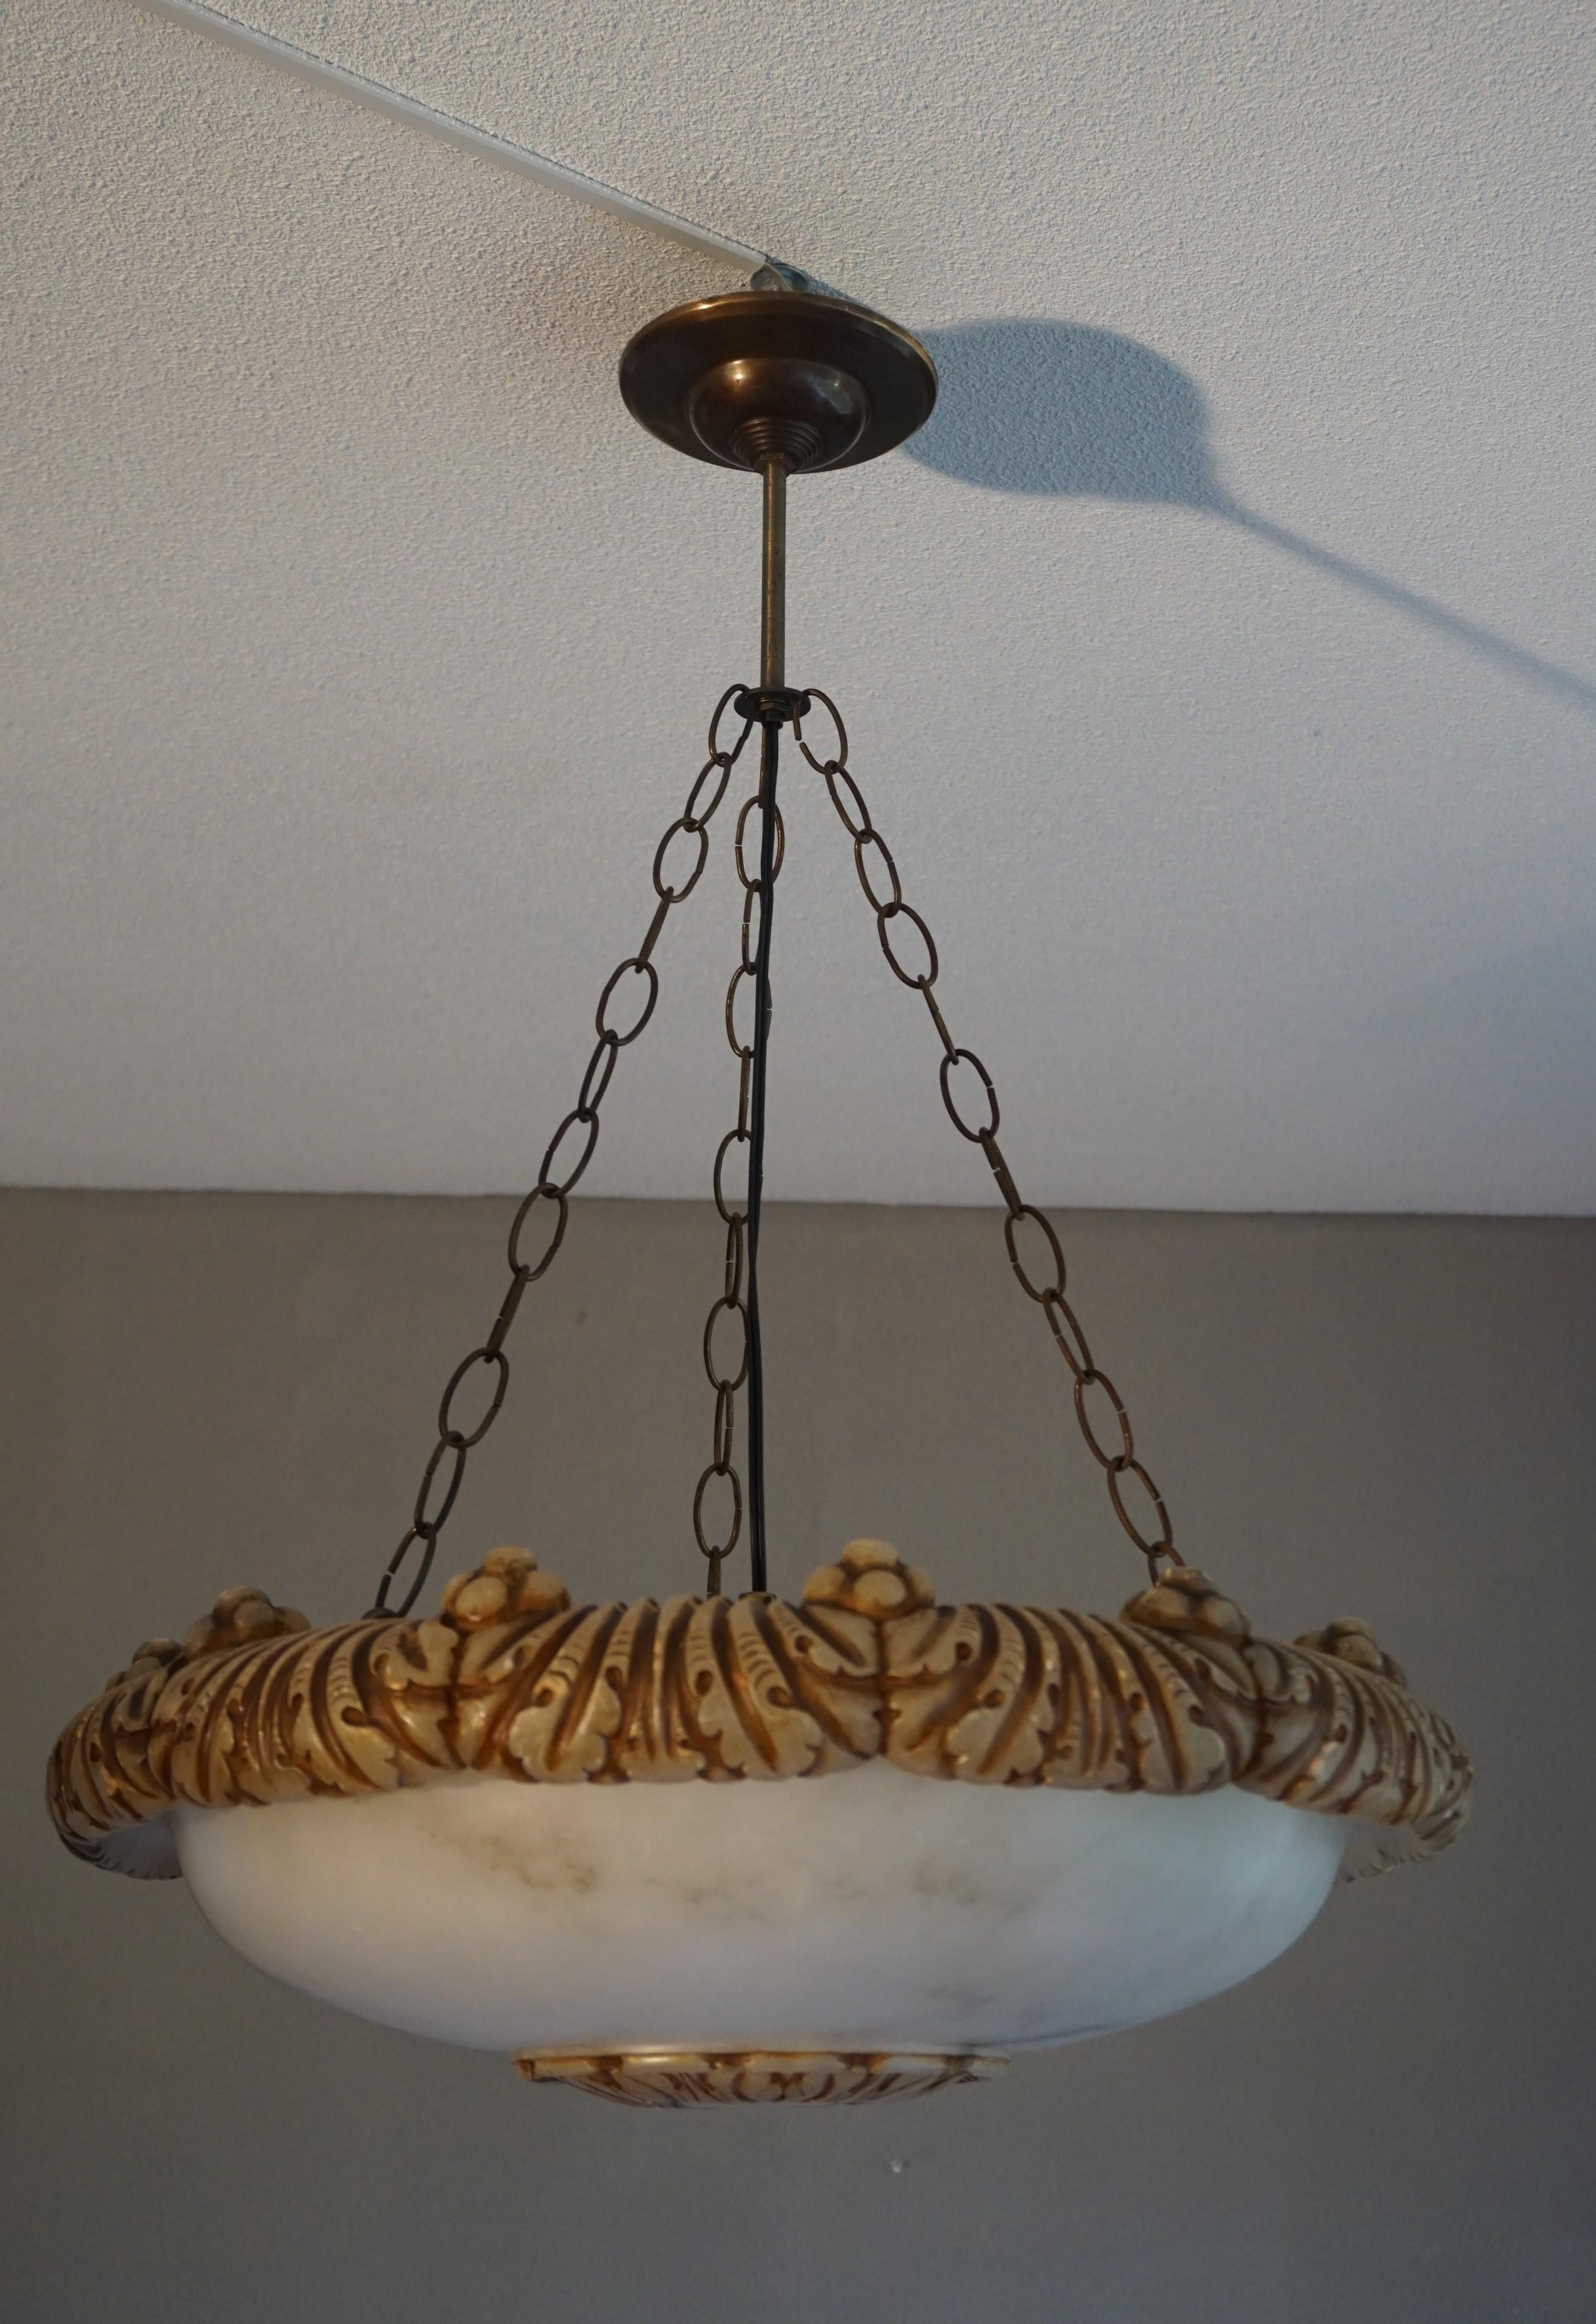 Italian Antique, Striking & Large Hand-Carved & Colored Alabaster Pendant Light Fixture